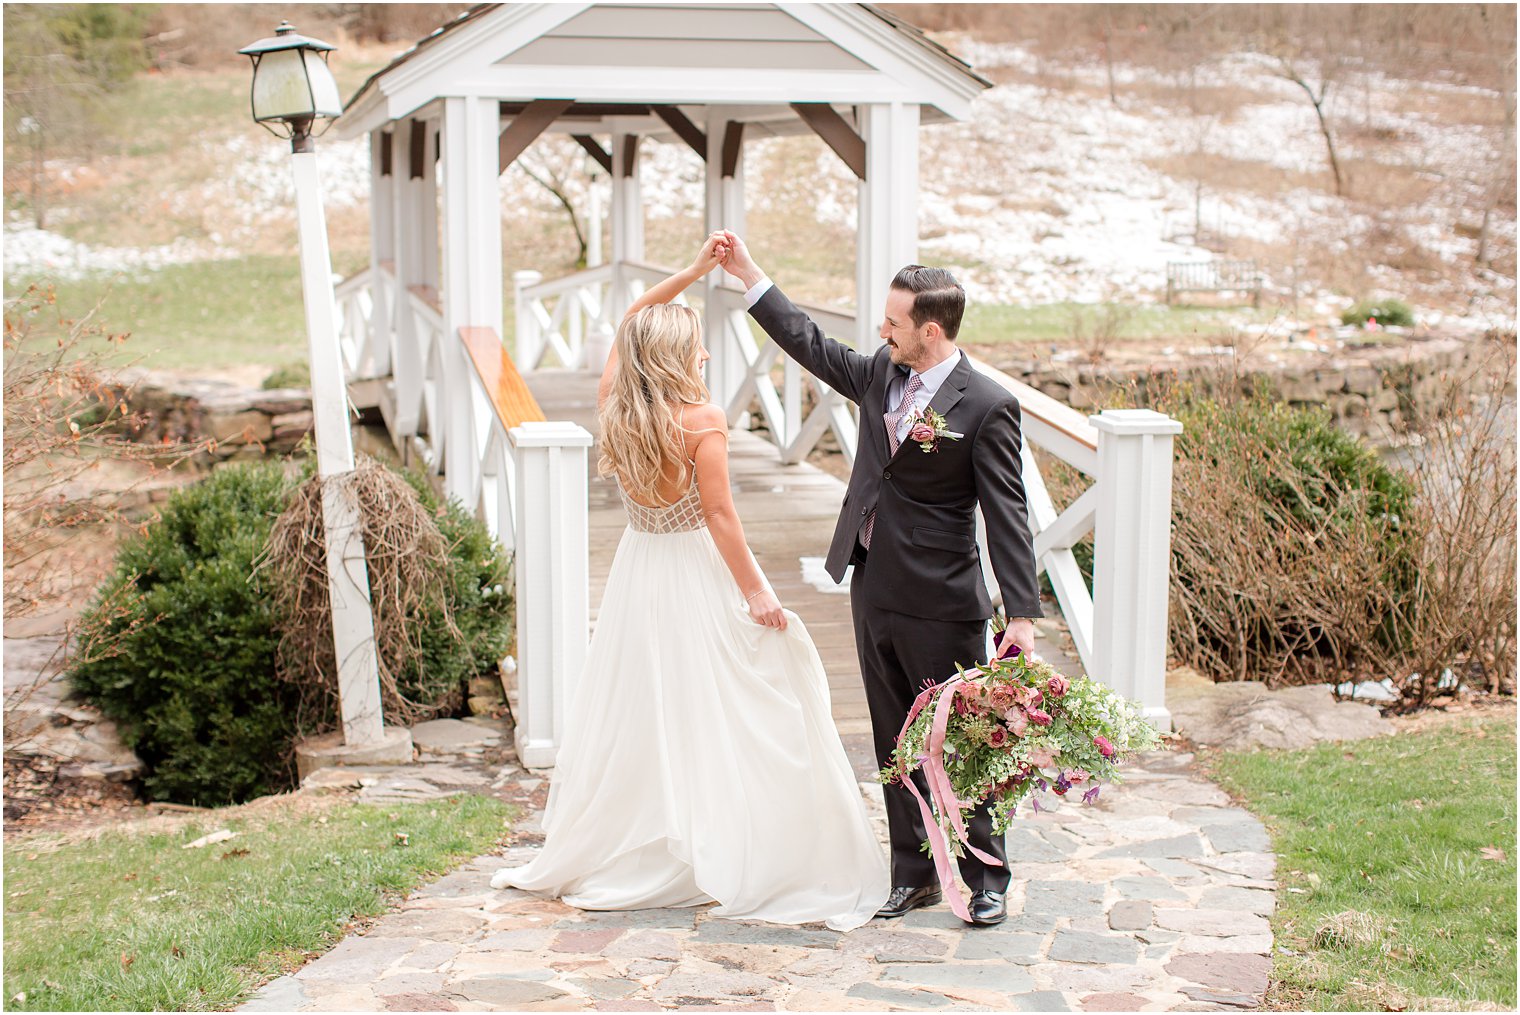 Twirling photo of bride and groom